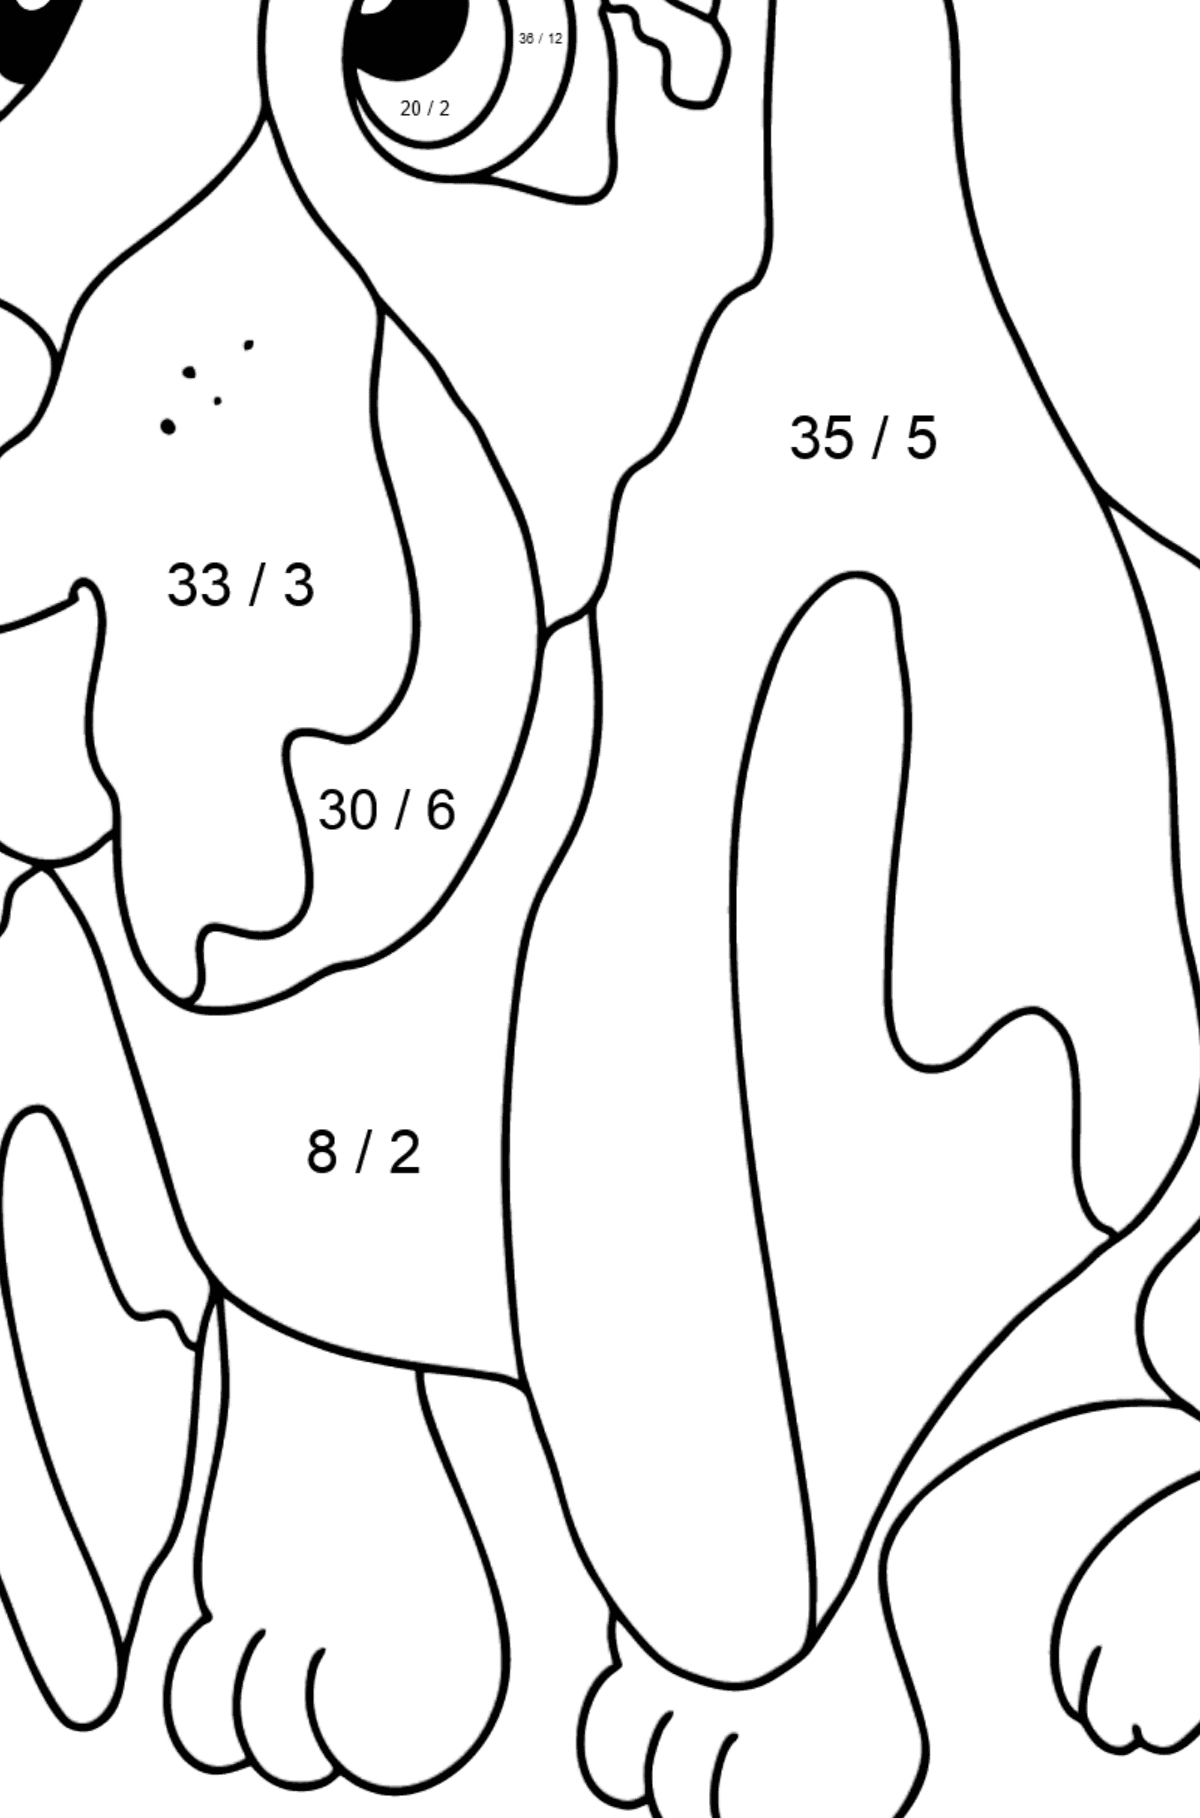 Coloring Page - A Dog is Sitting near a Bone - Math Coloring - Division for Kids